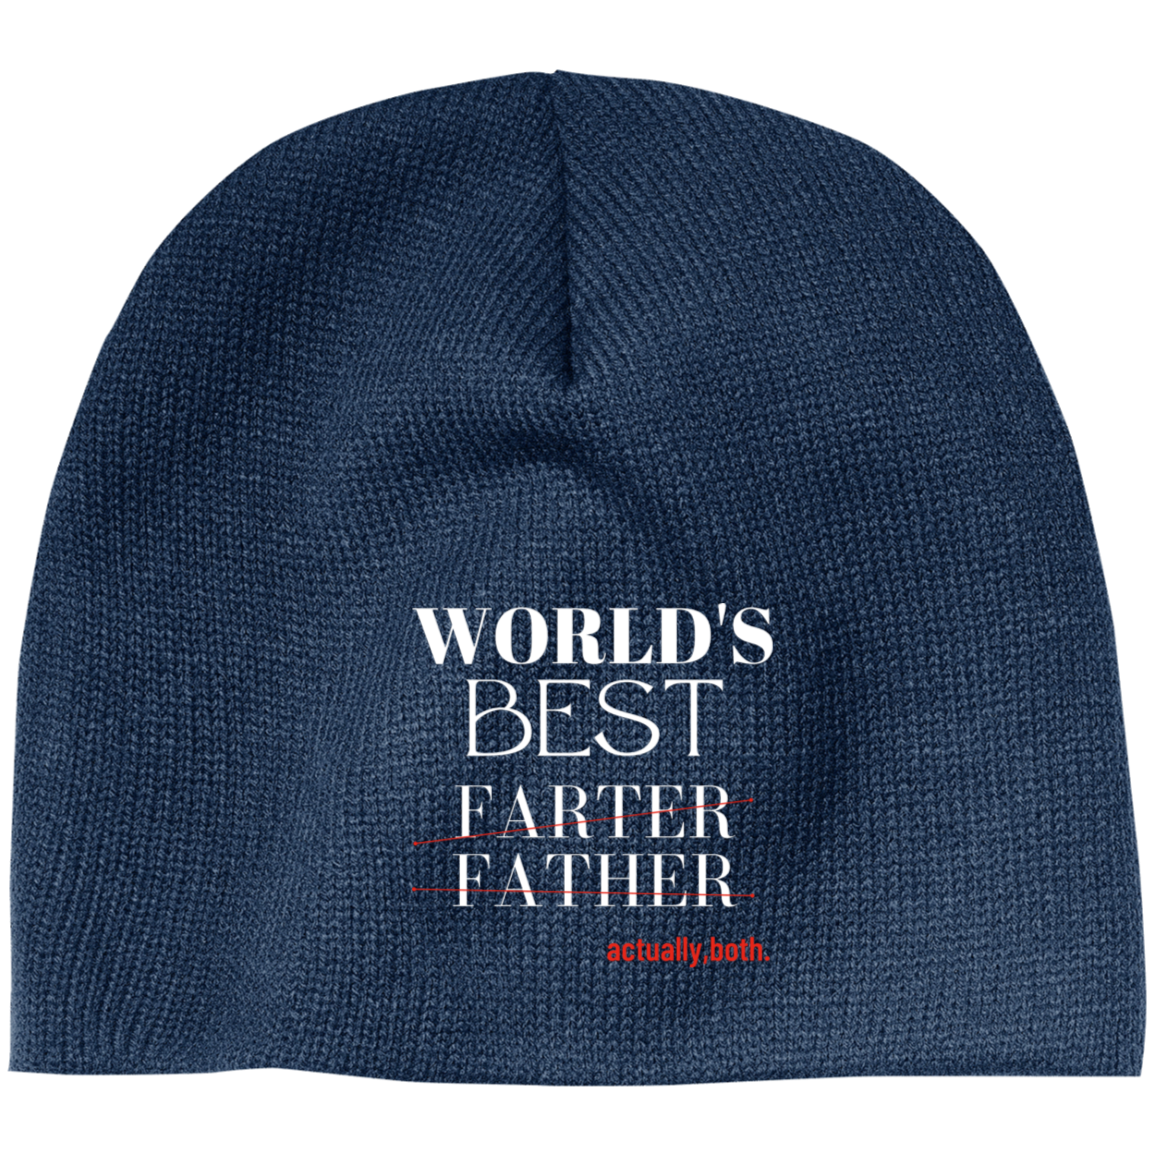 WORLD'S BEST FATHER Embroidered 100% Acrylic Beanie